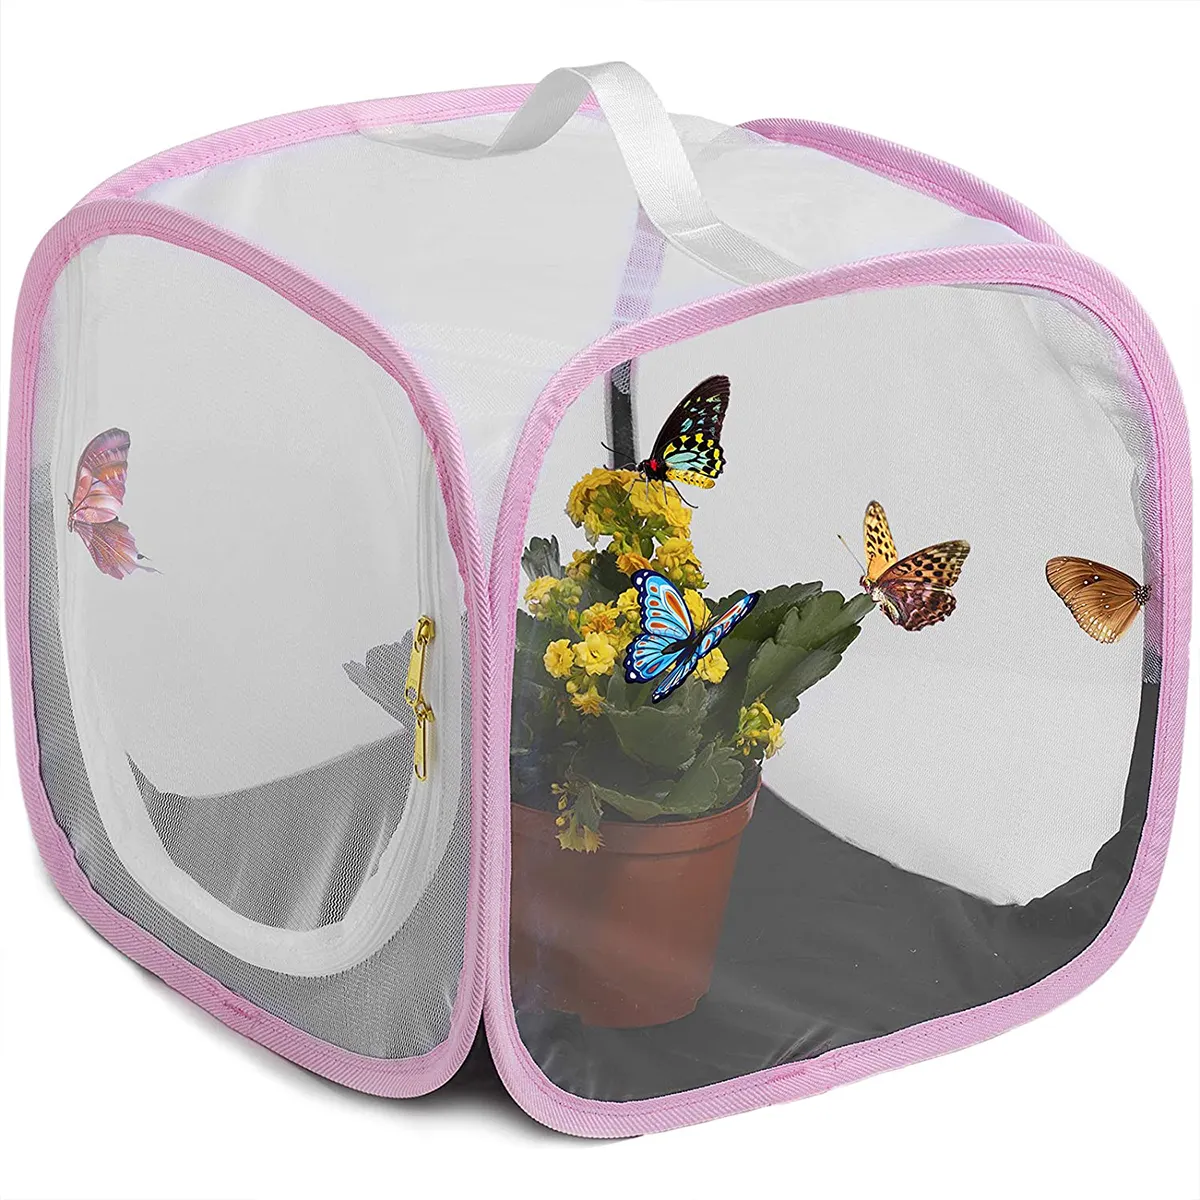 Pop Up Butterfly Insect Net Rearing Cage,Mesh Insect Cage 12 X 12 X 12 Inches Insect and Butterfly Habitat Cage Terrarium